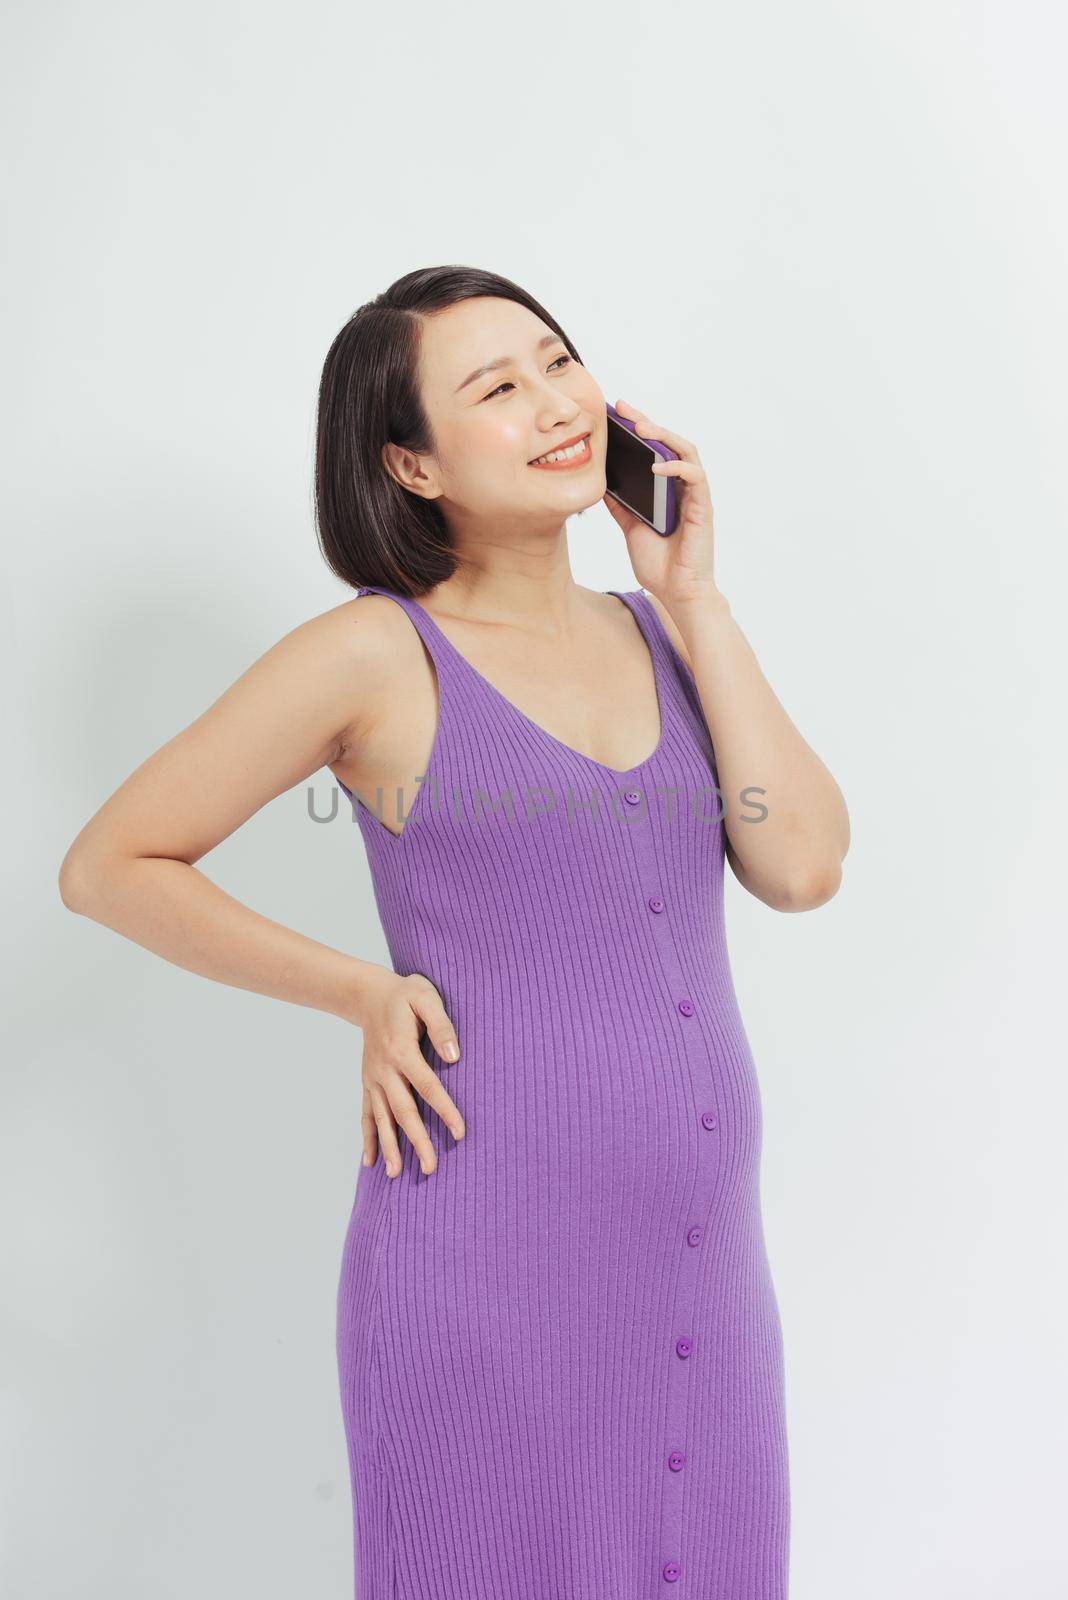 Portrait of latin pregnant woman talking on the phone against white background. Communication and pregnant concept.